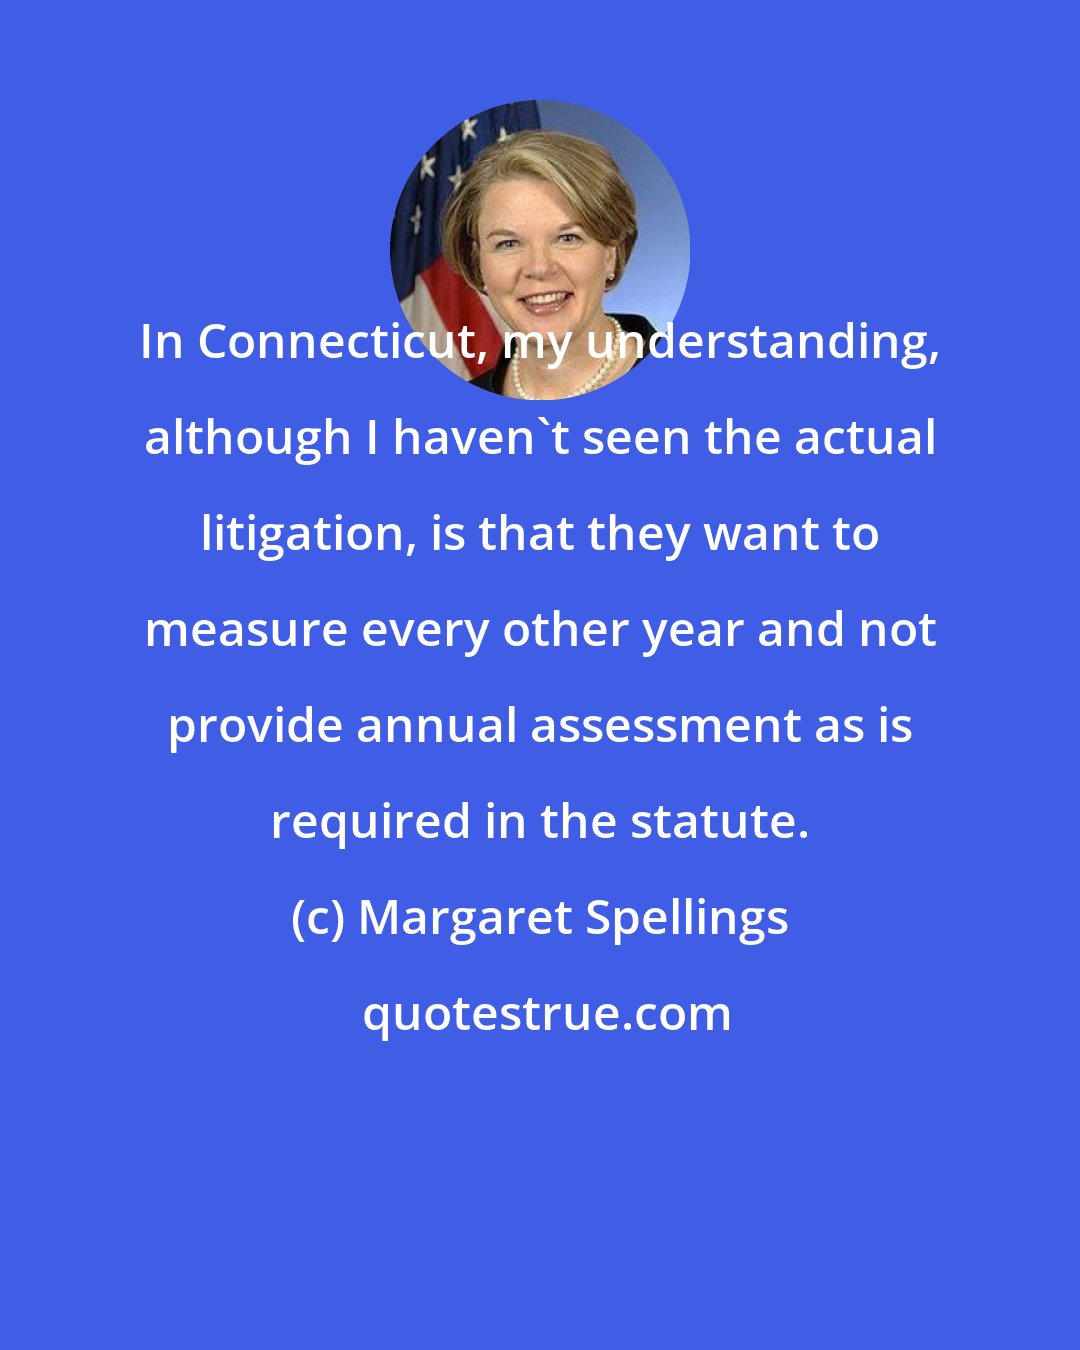 Margaret Spellings: In Connecticut, my understanding, although I haven't seen the actual litigation, is that they want to measure every other year and not provide annual assessment as is required in the statute.